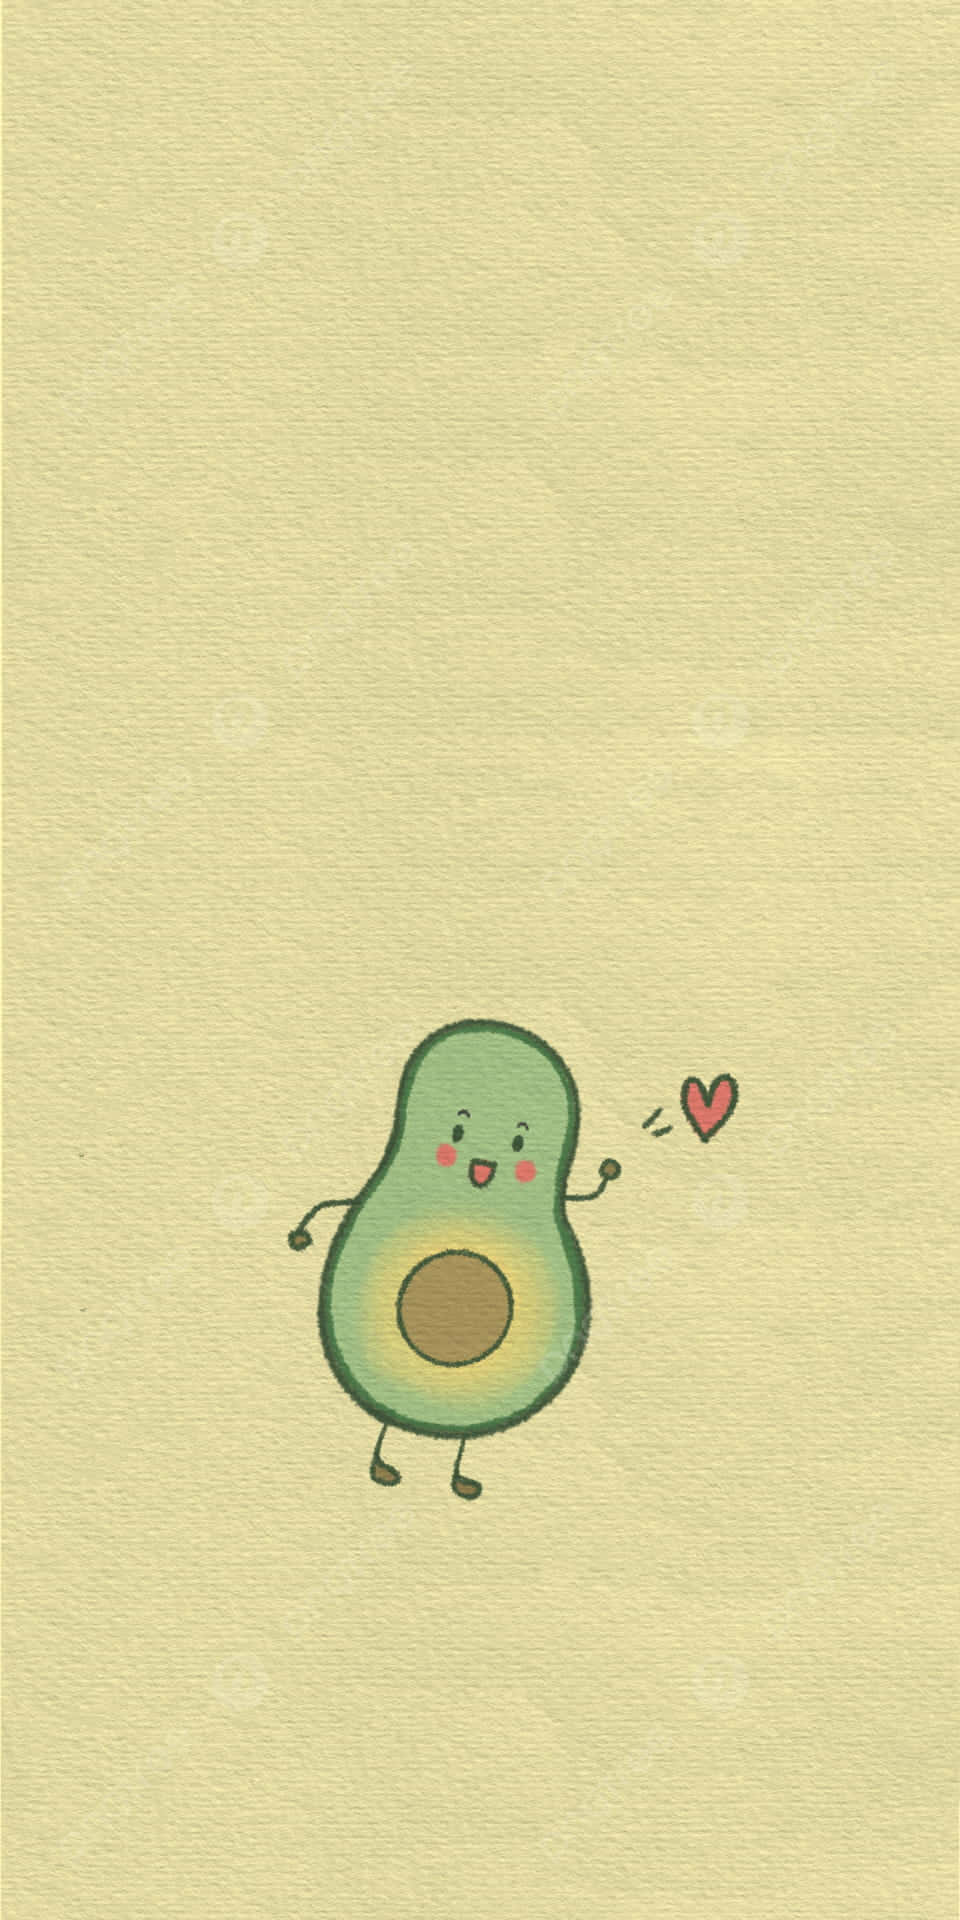 Download Cute Avocado Wallpaper for Your Phone